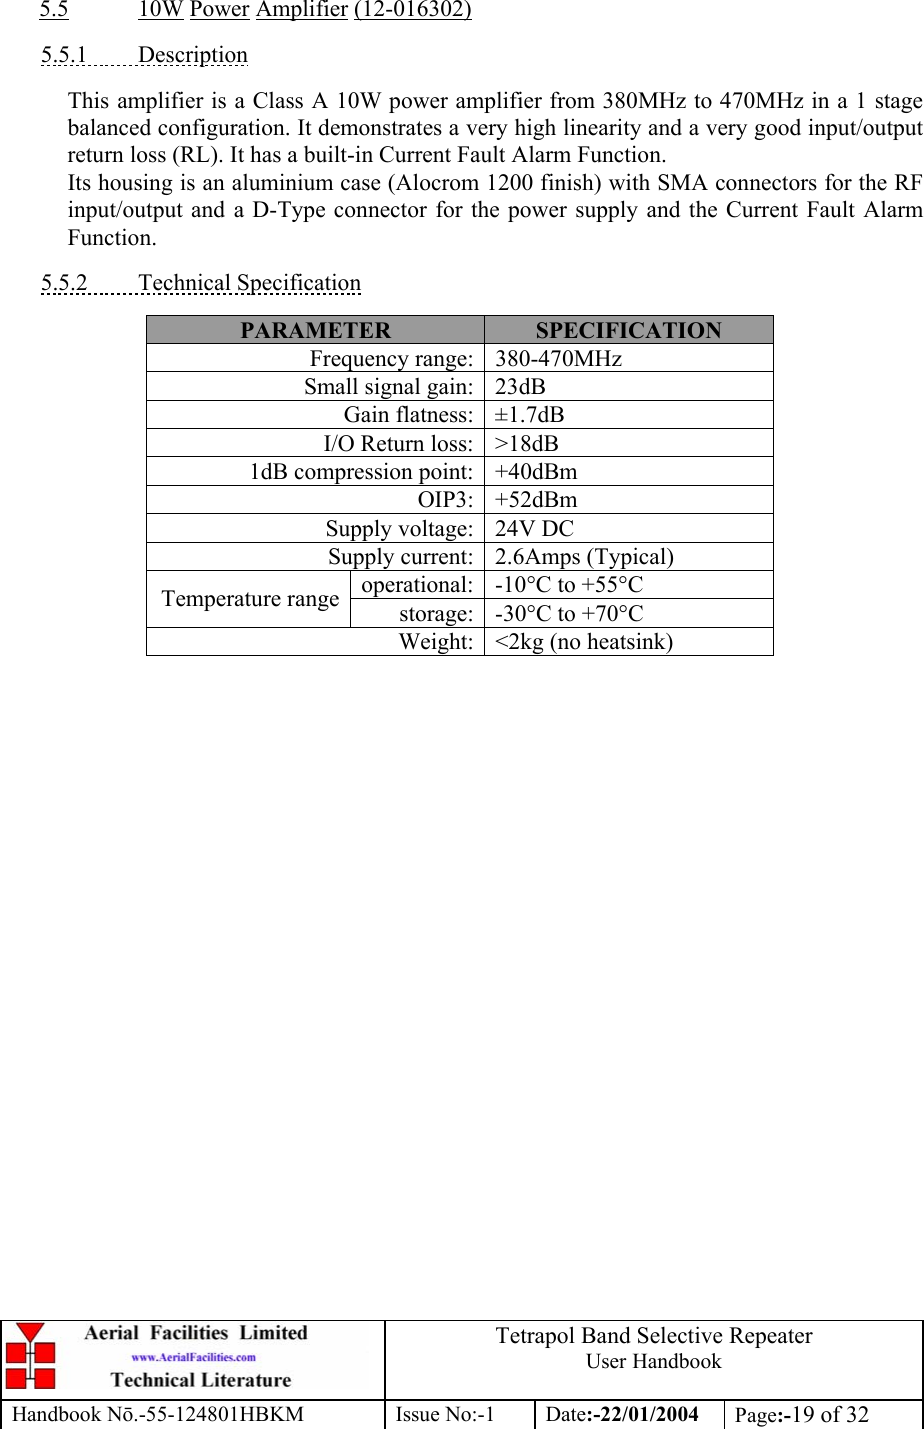  Tetrapol Band Selective Repeater User Handbook Handbook Nō.-55-124801HBKM Issue No:-1 Date:-22/01/2004  Page:-19 of 32  5.5 10W Power Amplifier (12-016302)  5.5.1 Description  This amplifier is a Class A 10W power amplifier from 380MHz to 470MHz in a 1 stage balanced configuration. It demonstrates a very high linearity and a very good input/output return loss (RL). It has a built-in Current Fault Alarm Function. Its housing is an aluminium case (Alocrom 1200 finish) with SMA connectors for the RF input/output and a D-Type connector for the power supply and the Current Fault Alarm Function.  5.5.2 Technical Specification  PARAMETER  SPECIFICATION Frequency range: 380-470MHz Small signal gain: 23dB Gain flatness: ±1.7dB I/O Return loss: &gt;18dB 1dB compression point: +40dBm OIP3: +52dBm Supply voltage: 24V DC Supply current: 2.6Amps (Typical) operational: -10°C to +55°C Temperature range storage: -30°C to +70°C Weight: &lt;2kg (no heatsink)  